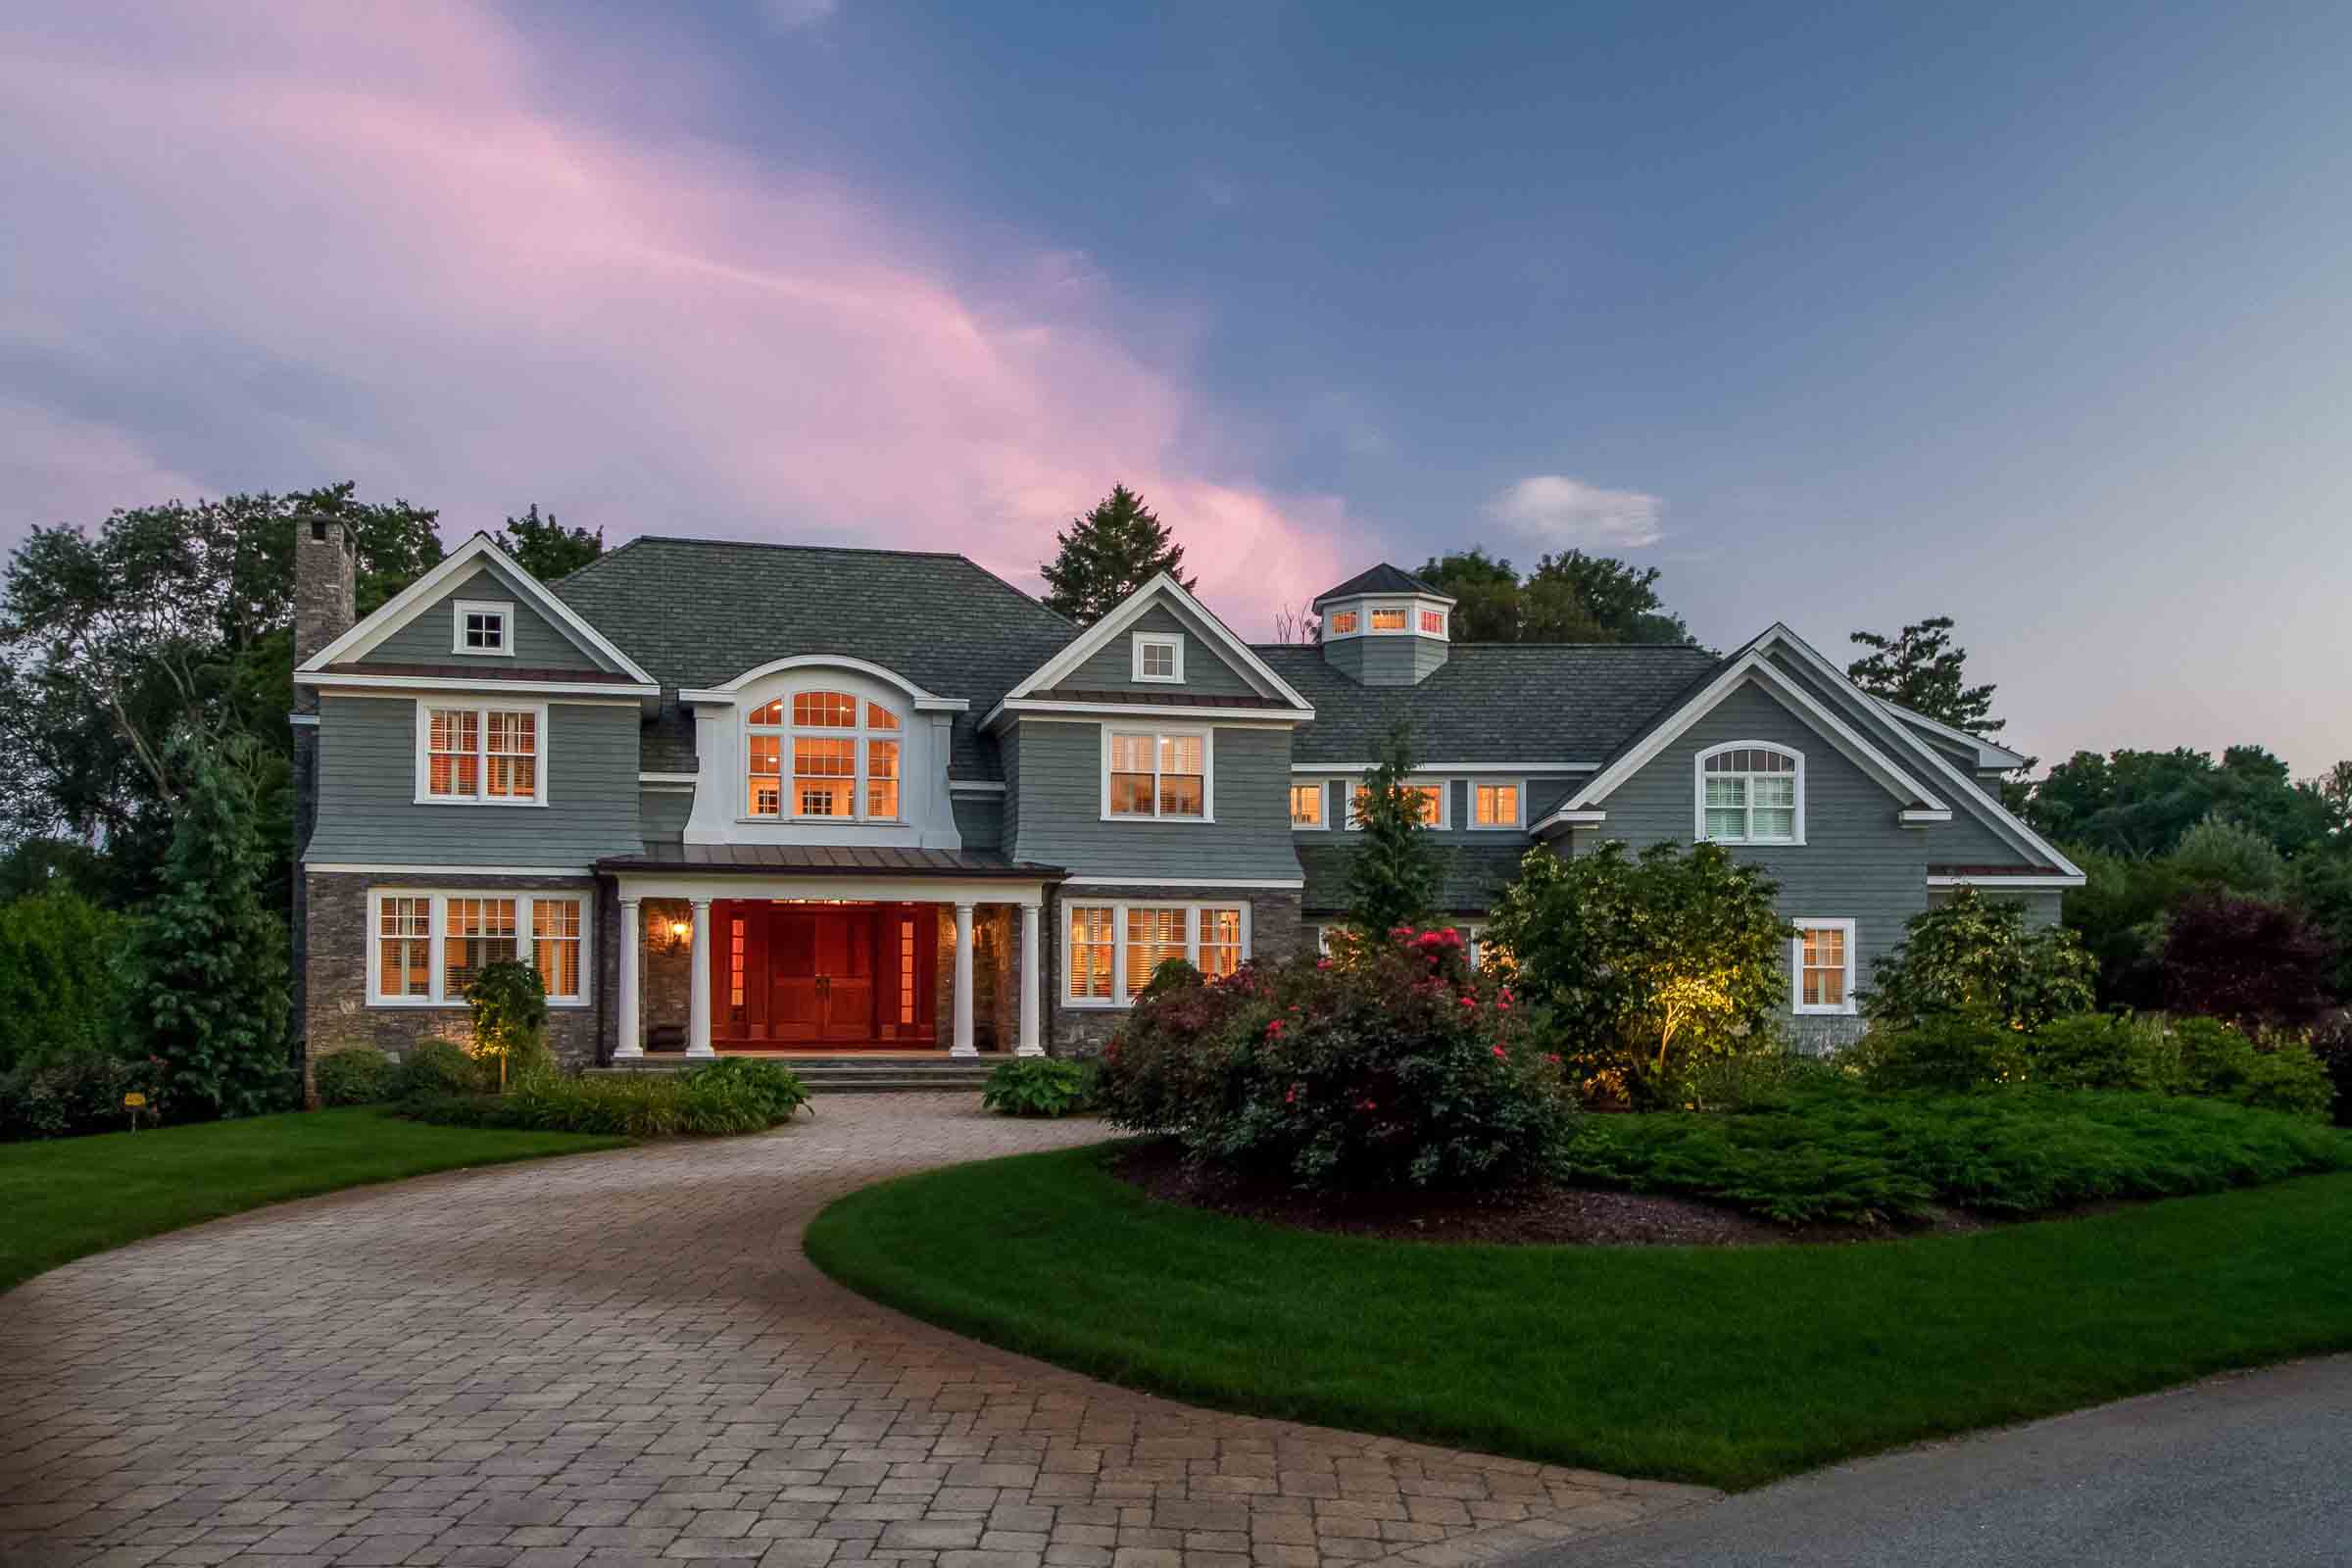 STUNNING BARRINGTON HOME IN RUMSTICK VILLAGE SELLS FOR $2,400,000